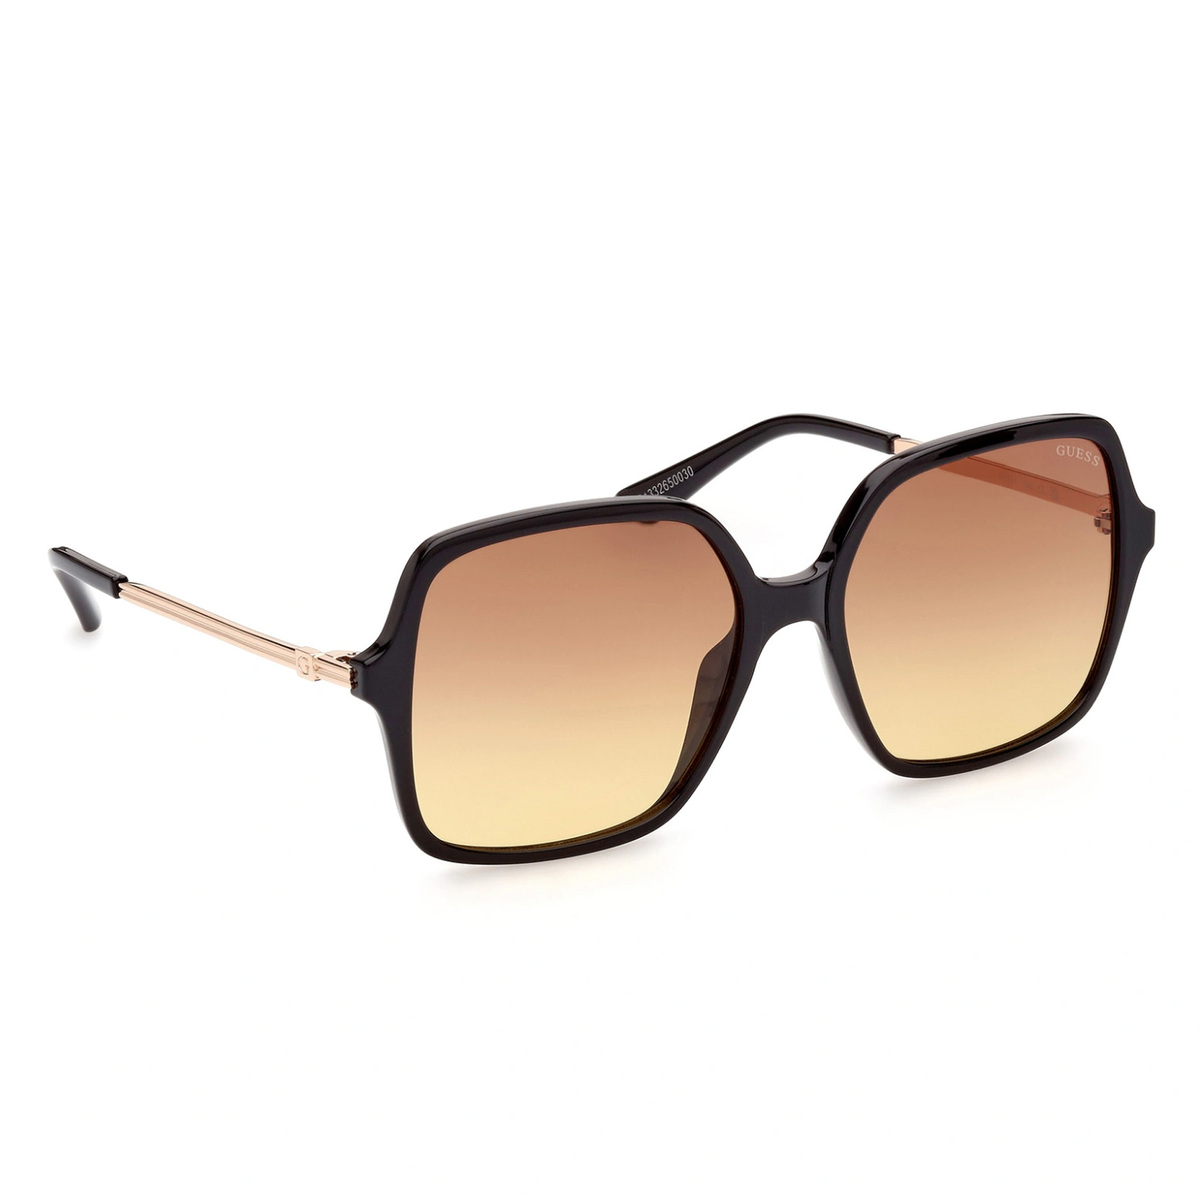 Guess Women's Square Sunglasses, Gradiant Brown, 784501F57